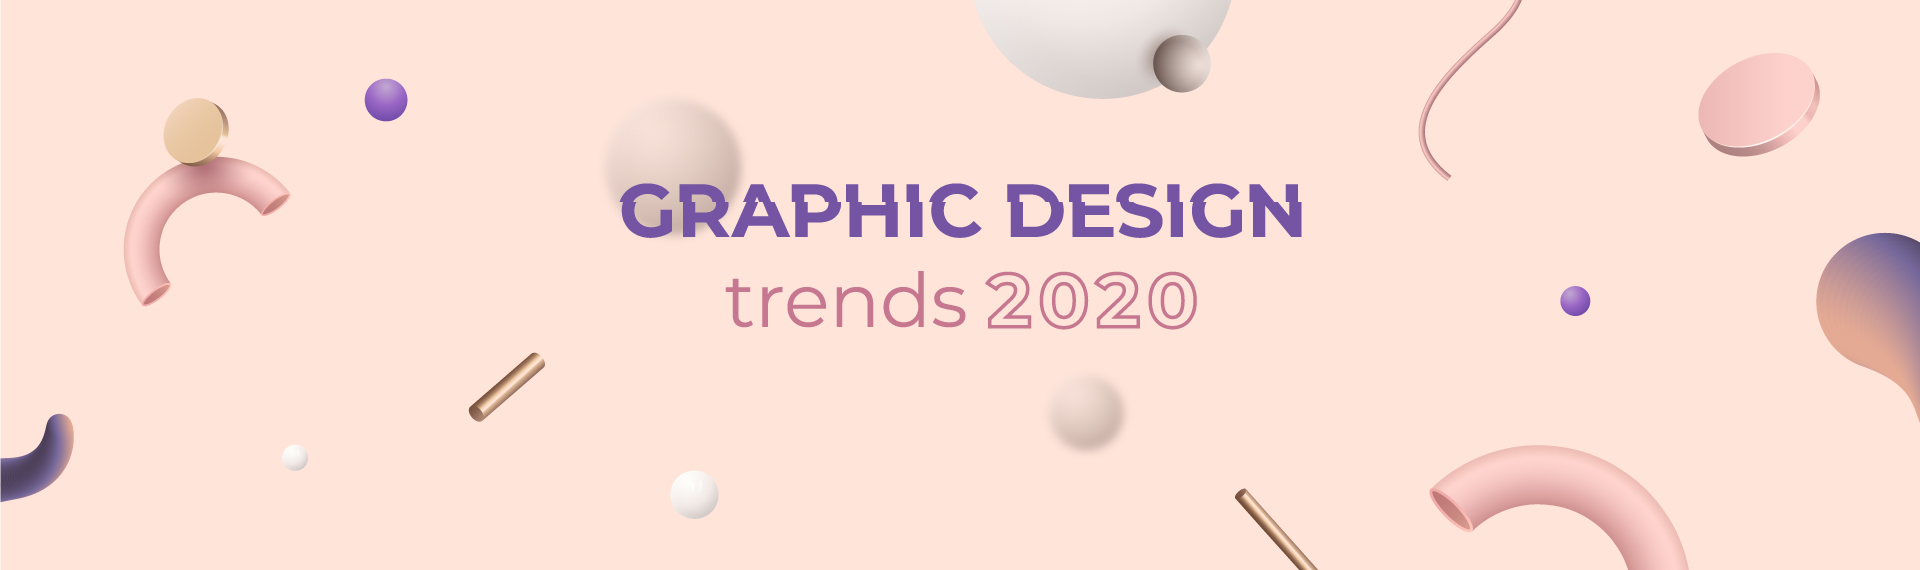 5 Graphic Design Trends That Will Dominate in 2020